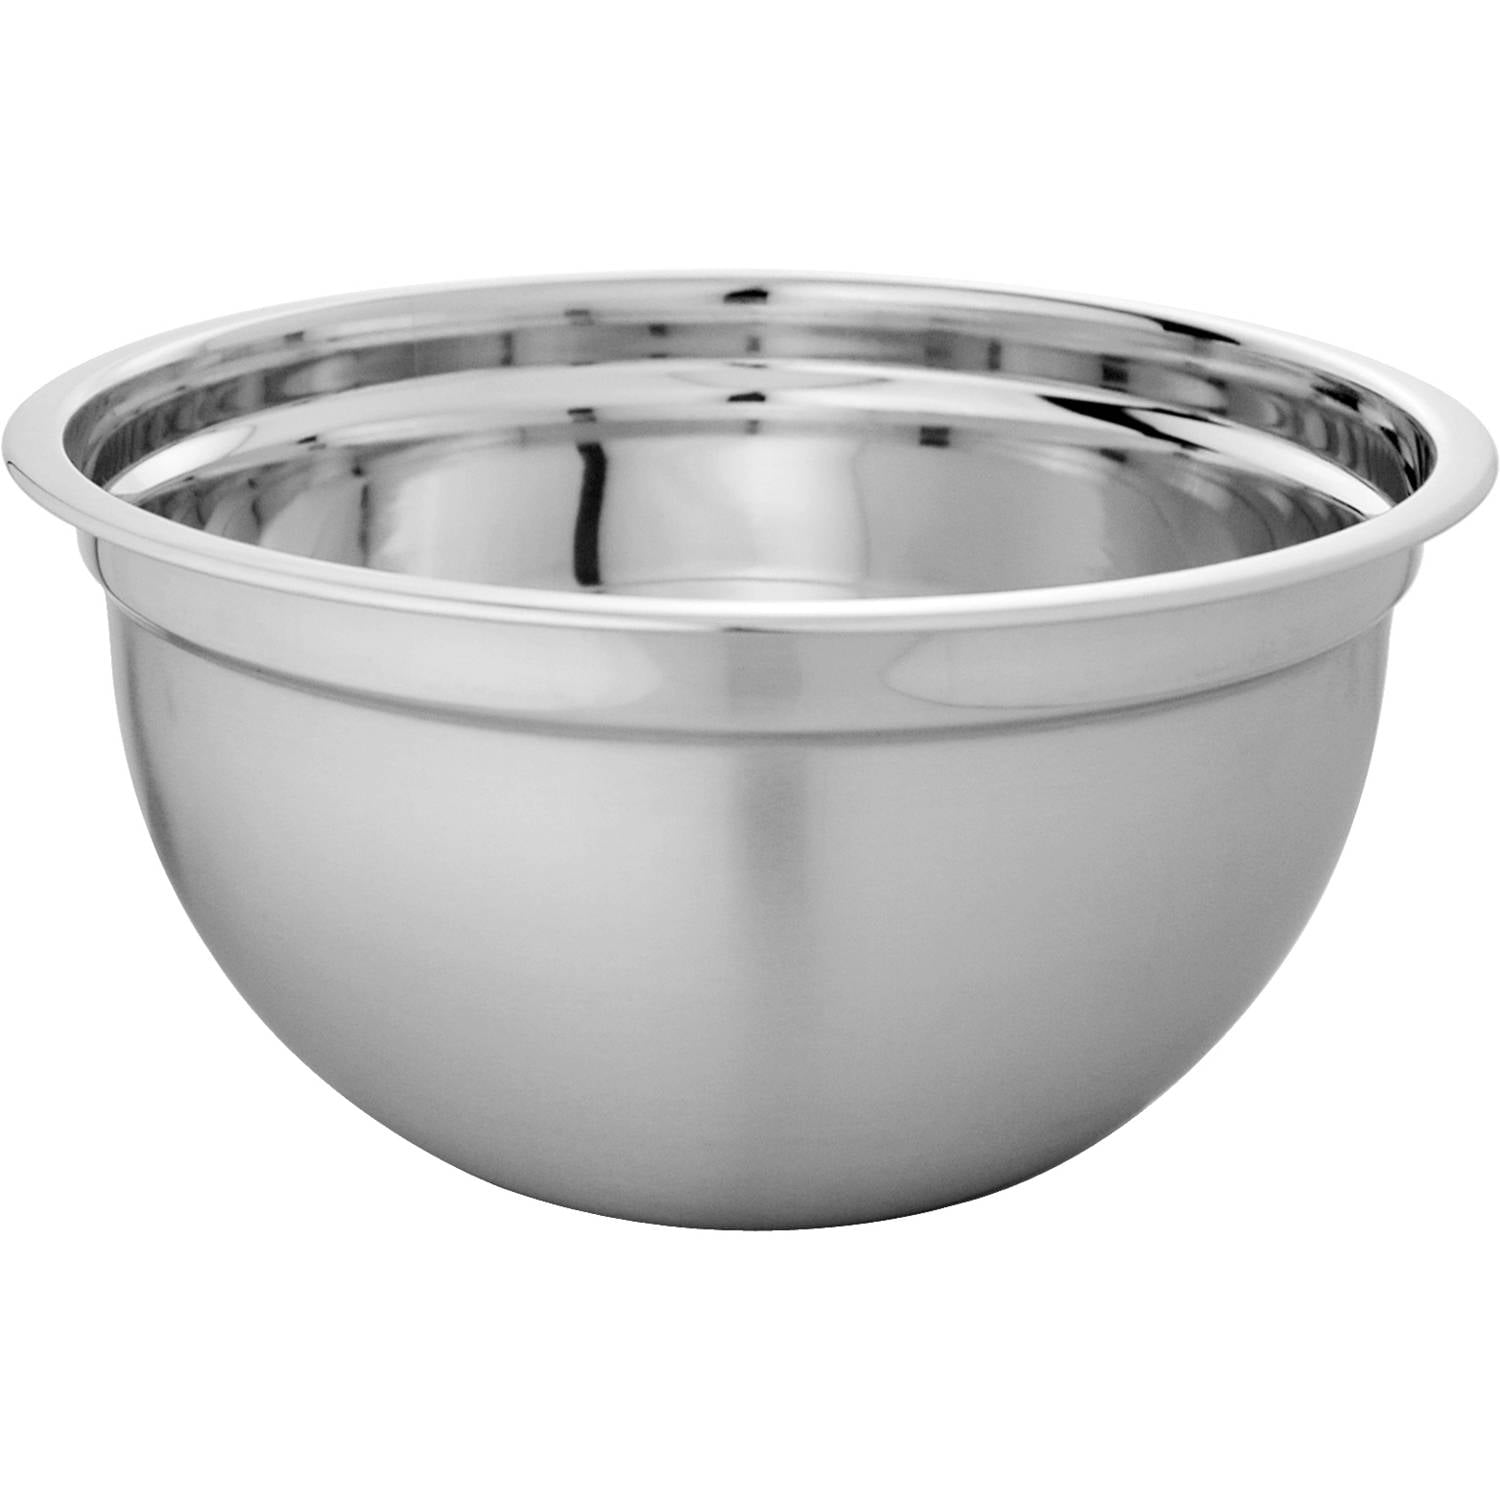 Mainstays SS 8QT Multi-Use Mixing Bowl for Prepping, Serving or Storage 